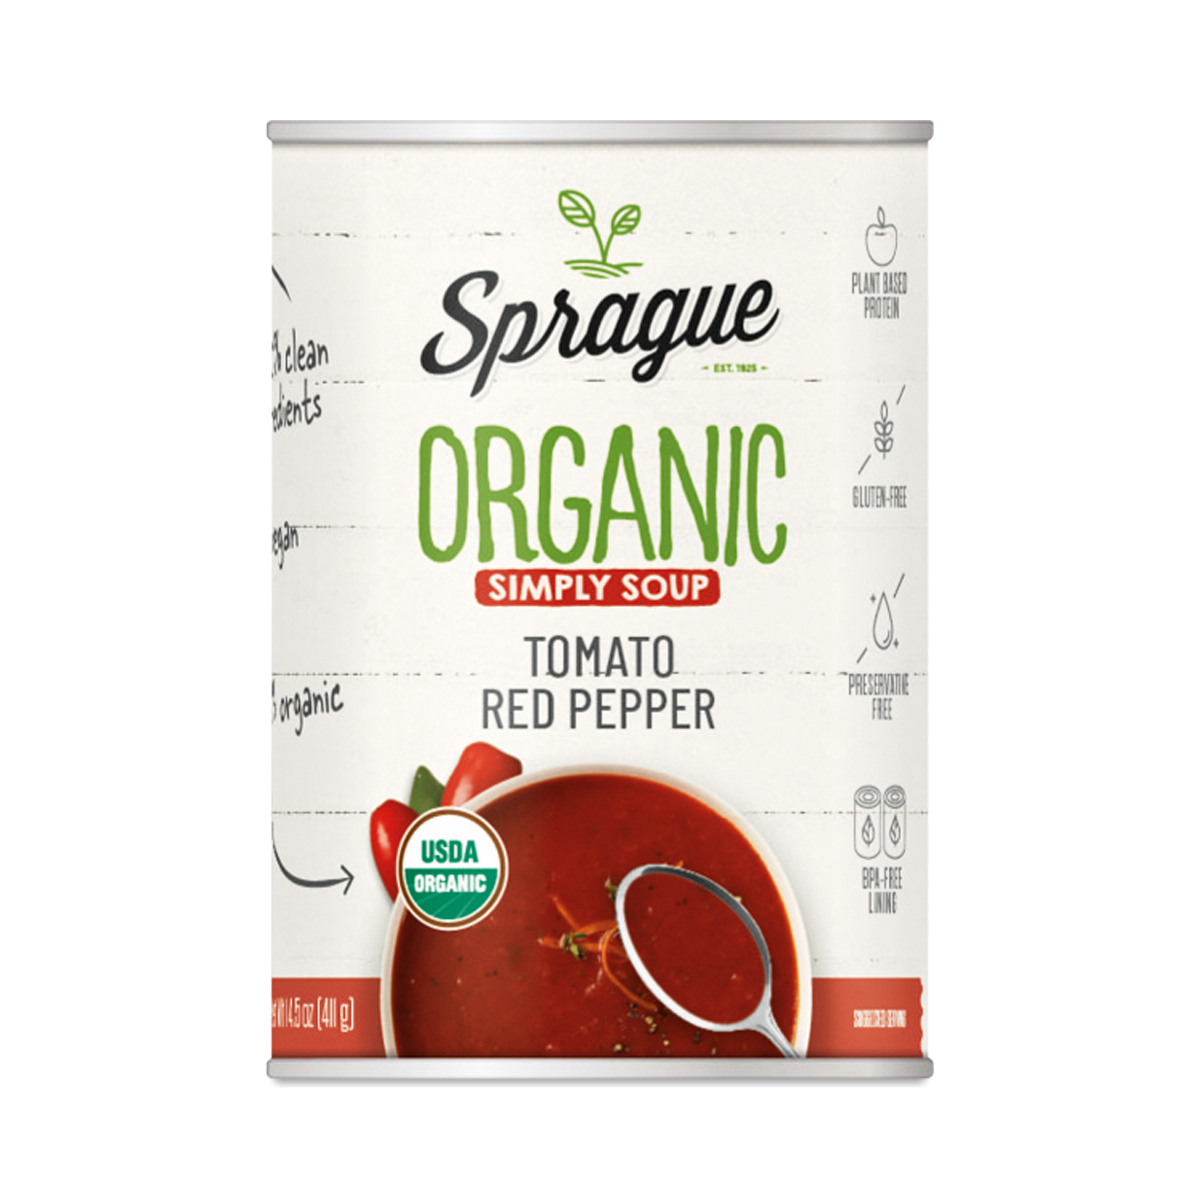 Sprague Organic Tomato & Red Pepper Soup 15 oz can